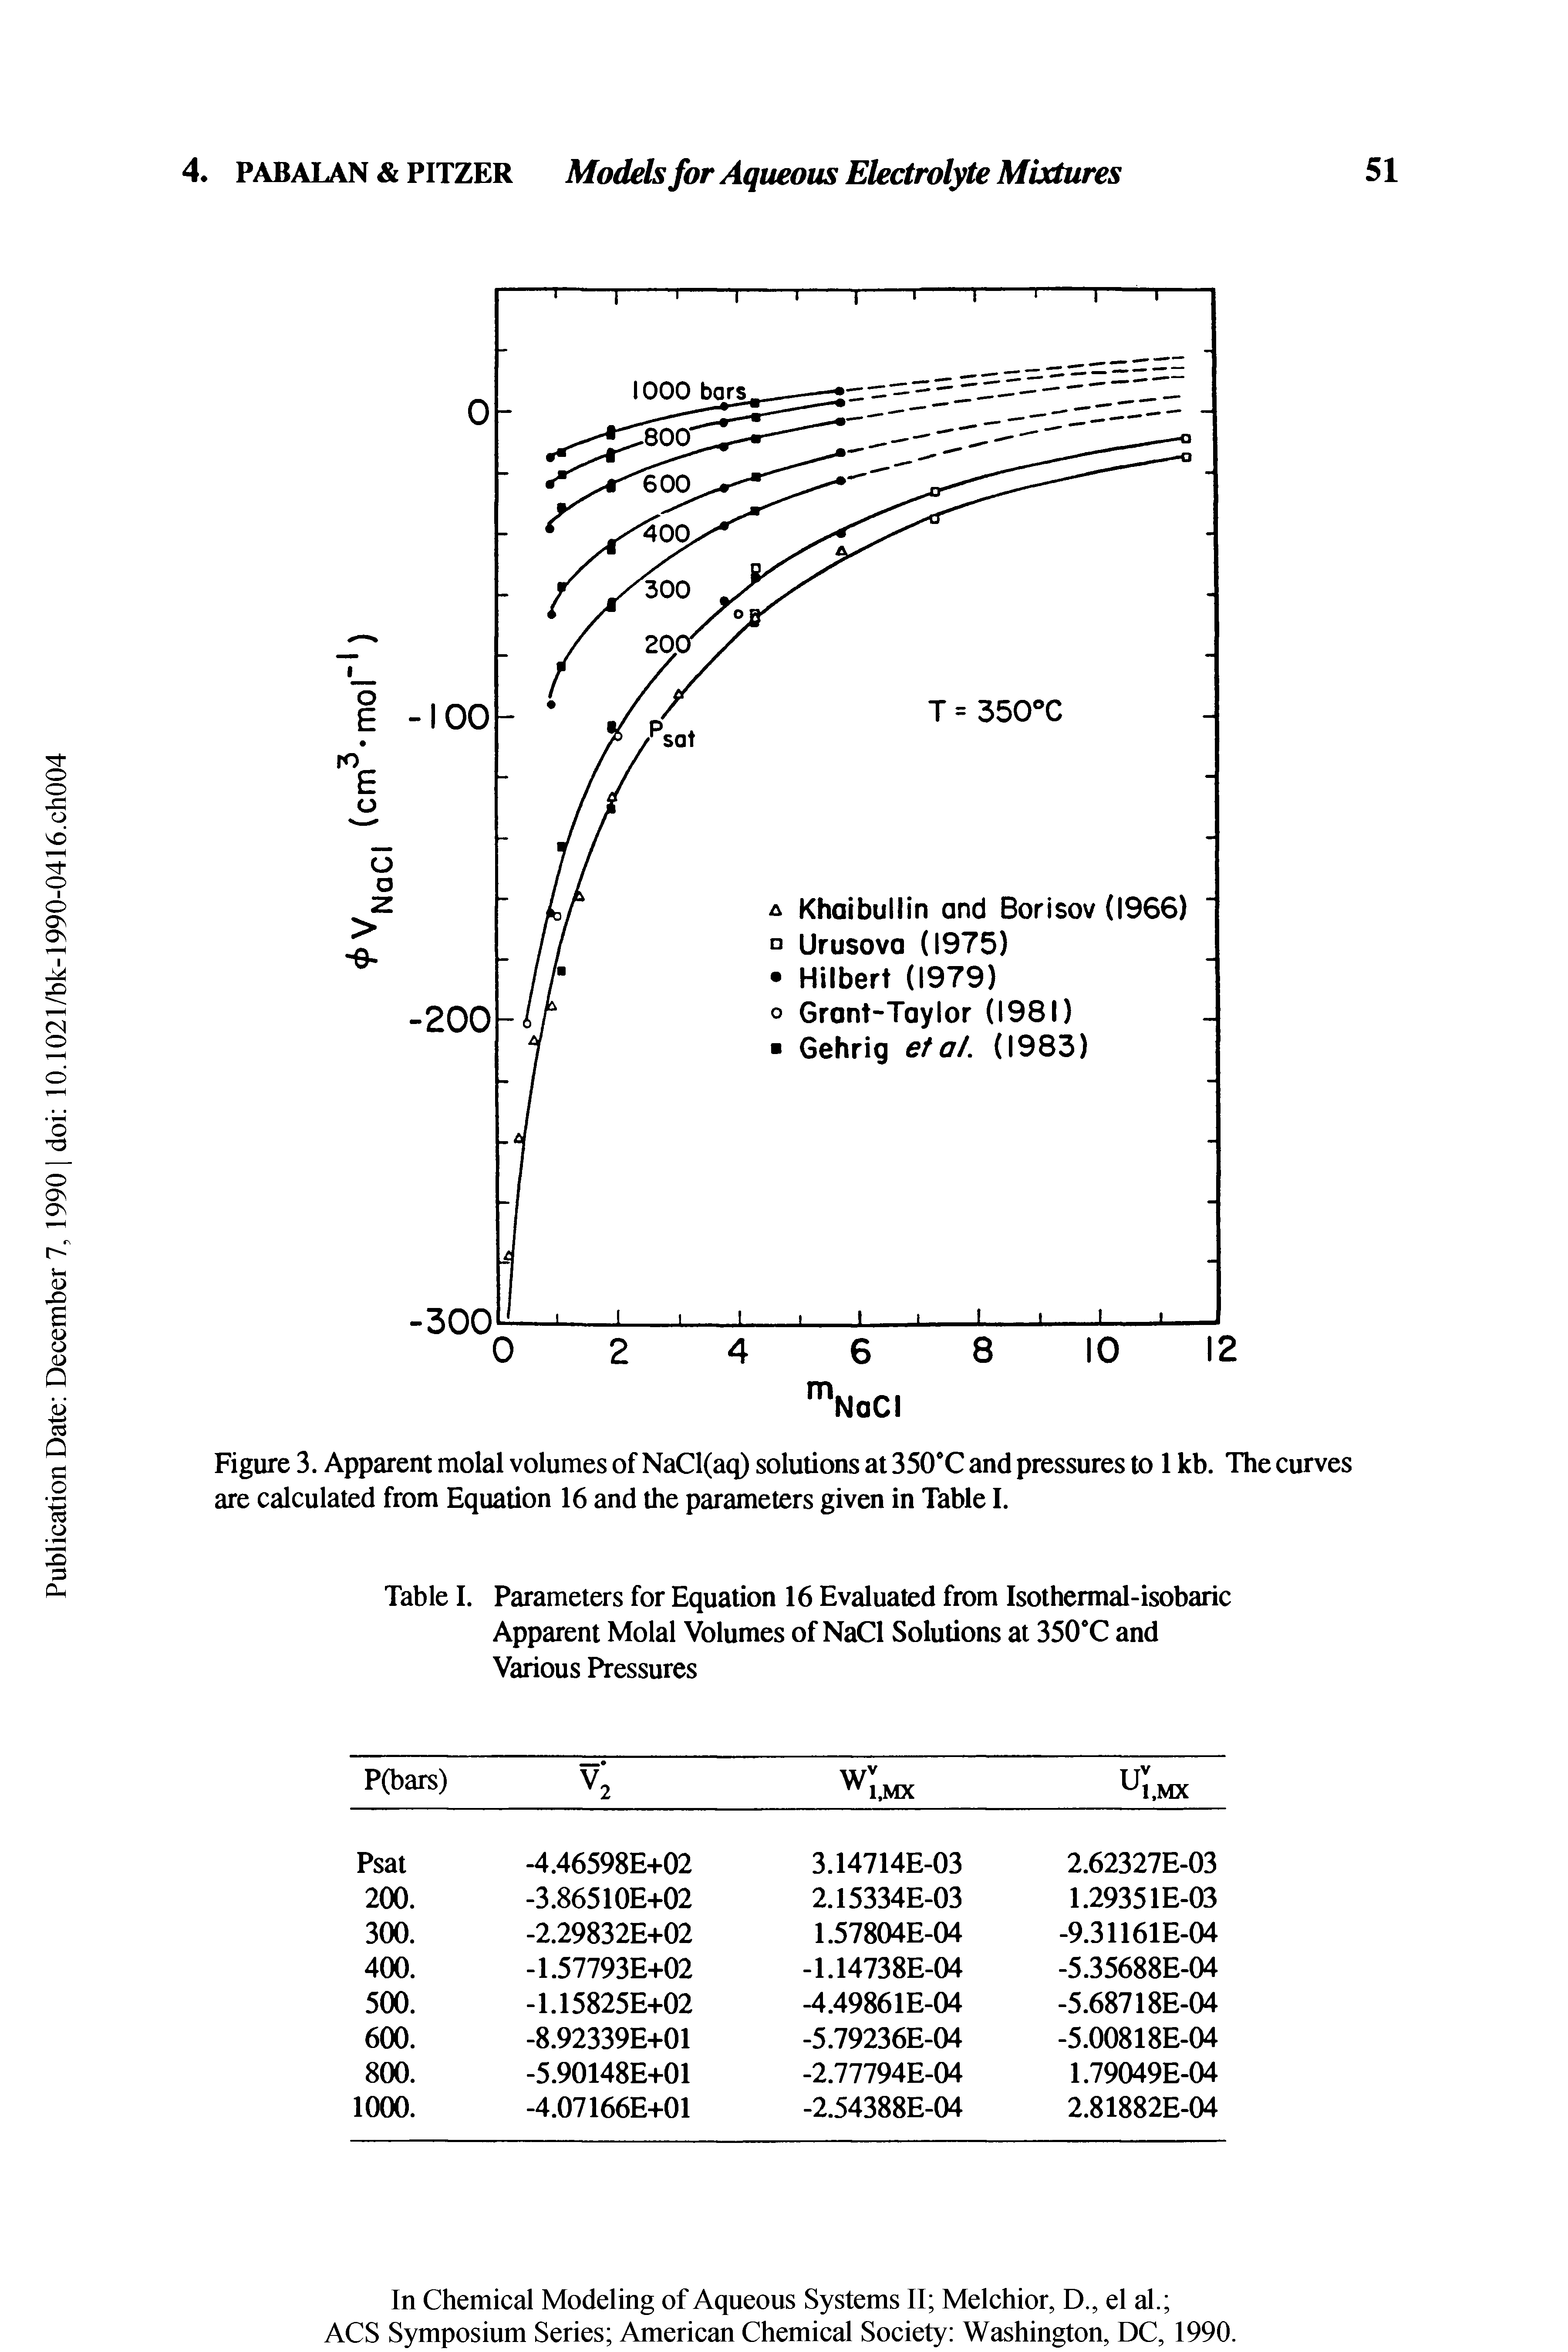 Figure 3. Apparent molal volumes of NaCl(aq) solutions at 350 C and pressures to 1 kb. The curves are calculated from Equation 16 and the parameters given in Table I.